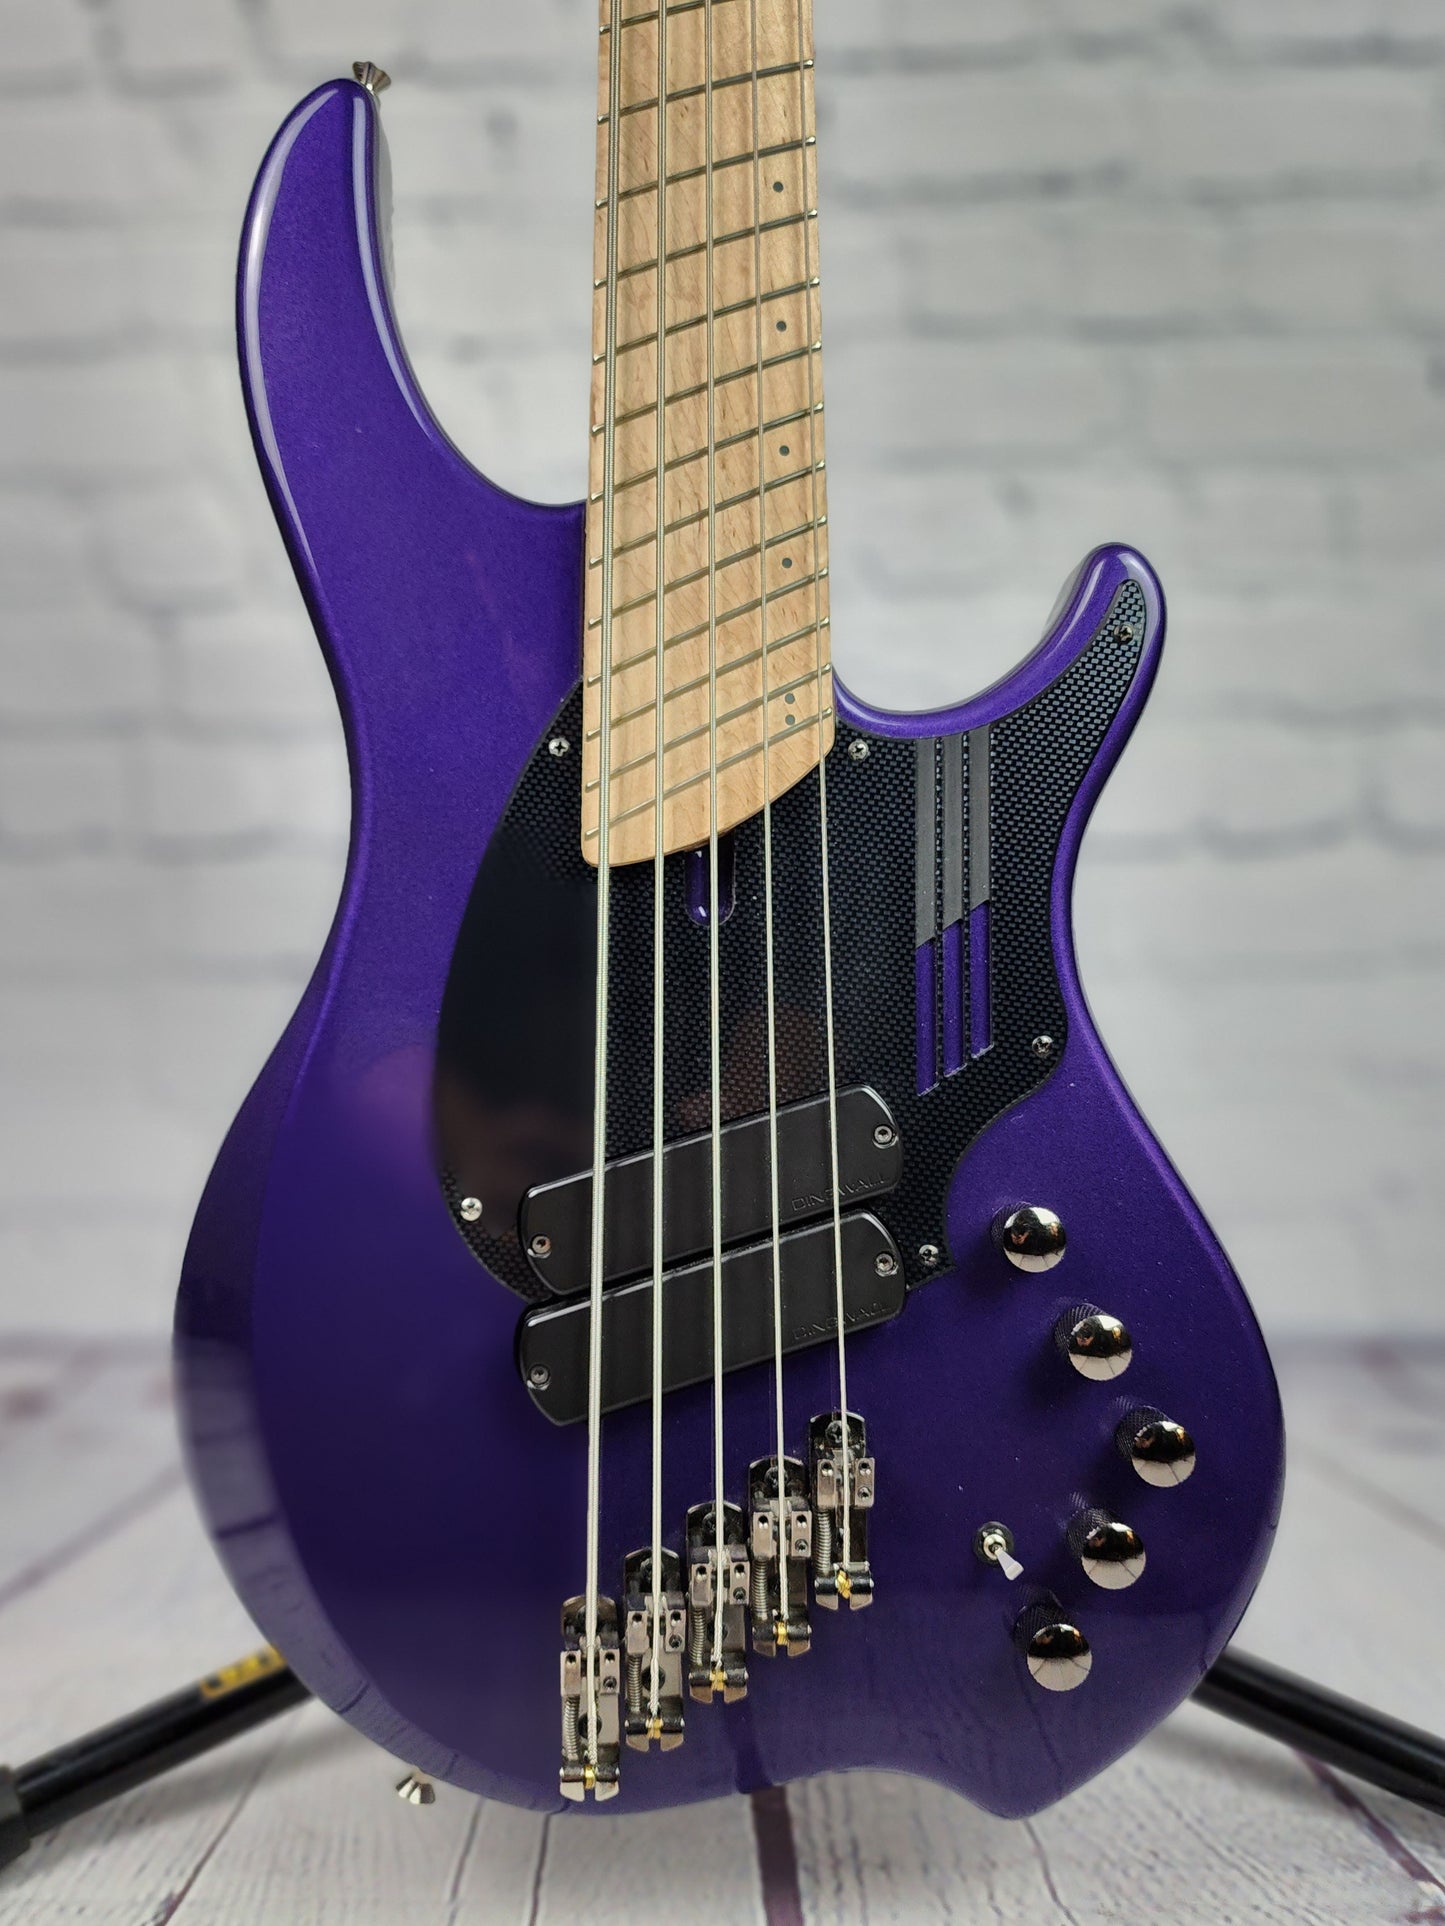 USED Dingwall NG2 Nolly 5 String Bass Purple Metallic Darkglass